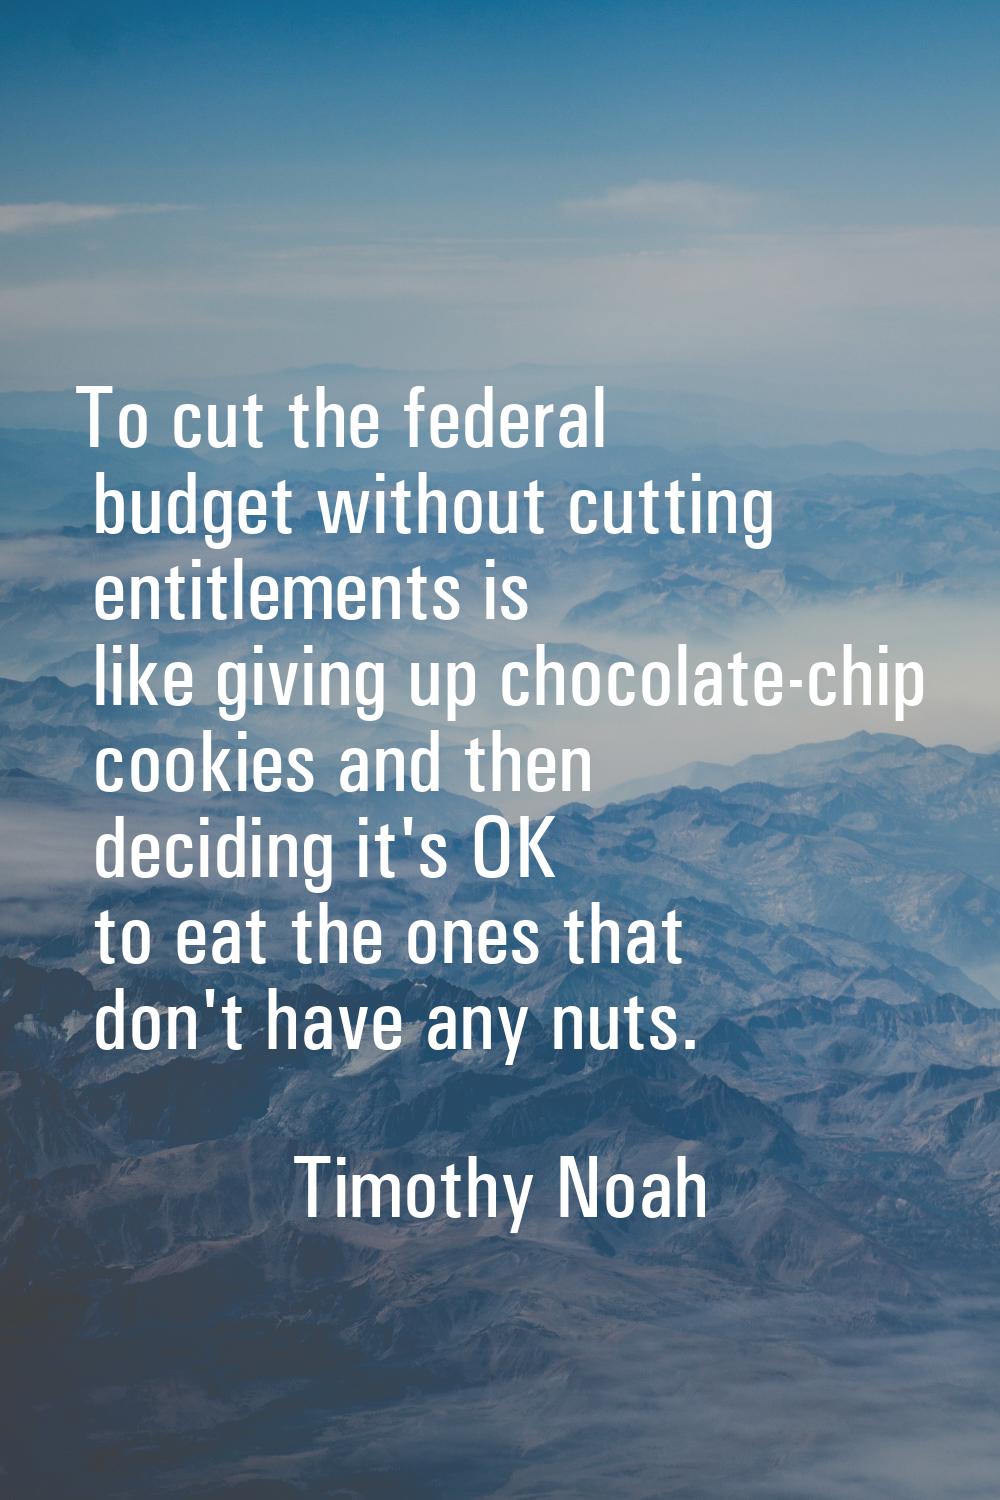 To cut the federal budget without cutting entitlements is like giving up chocolate-chip cookies and